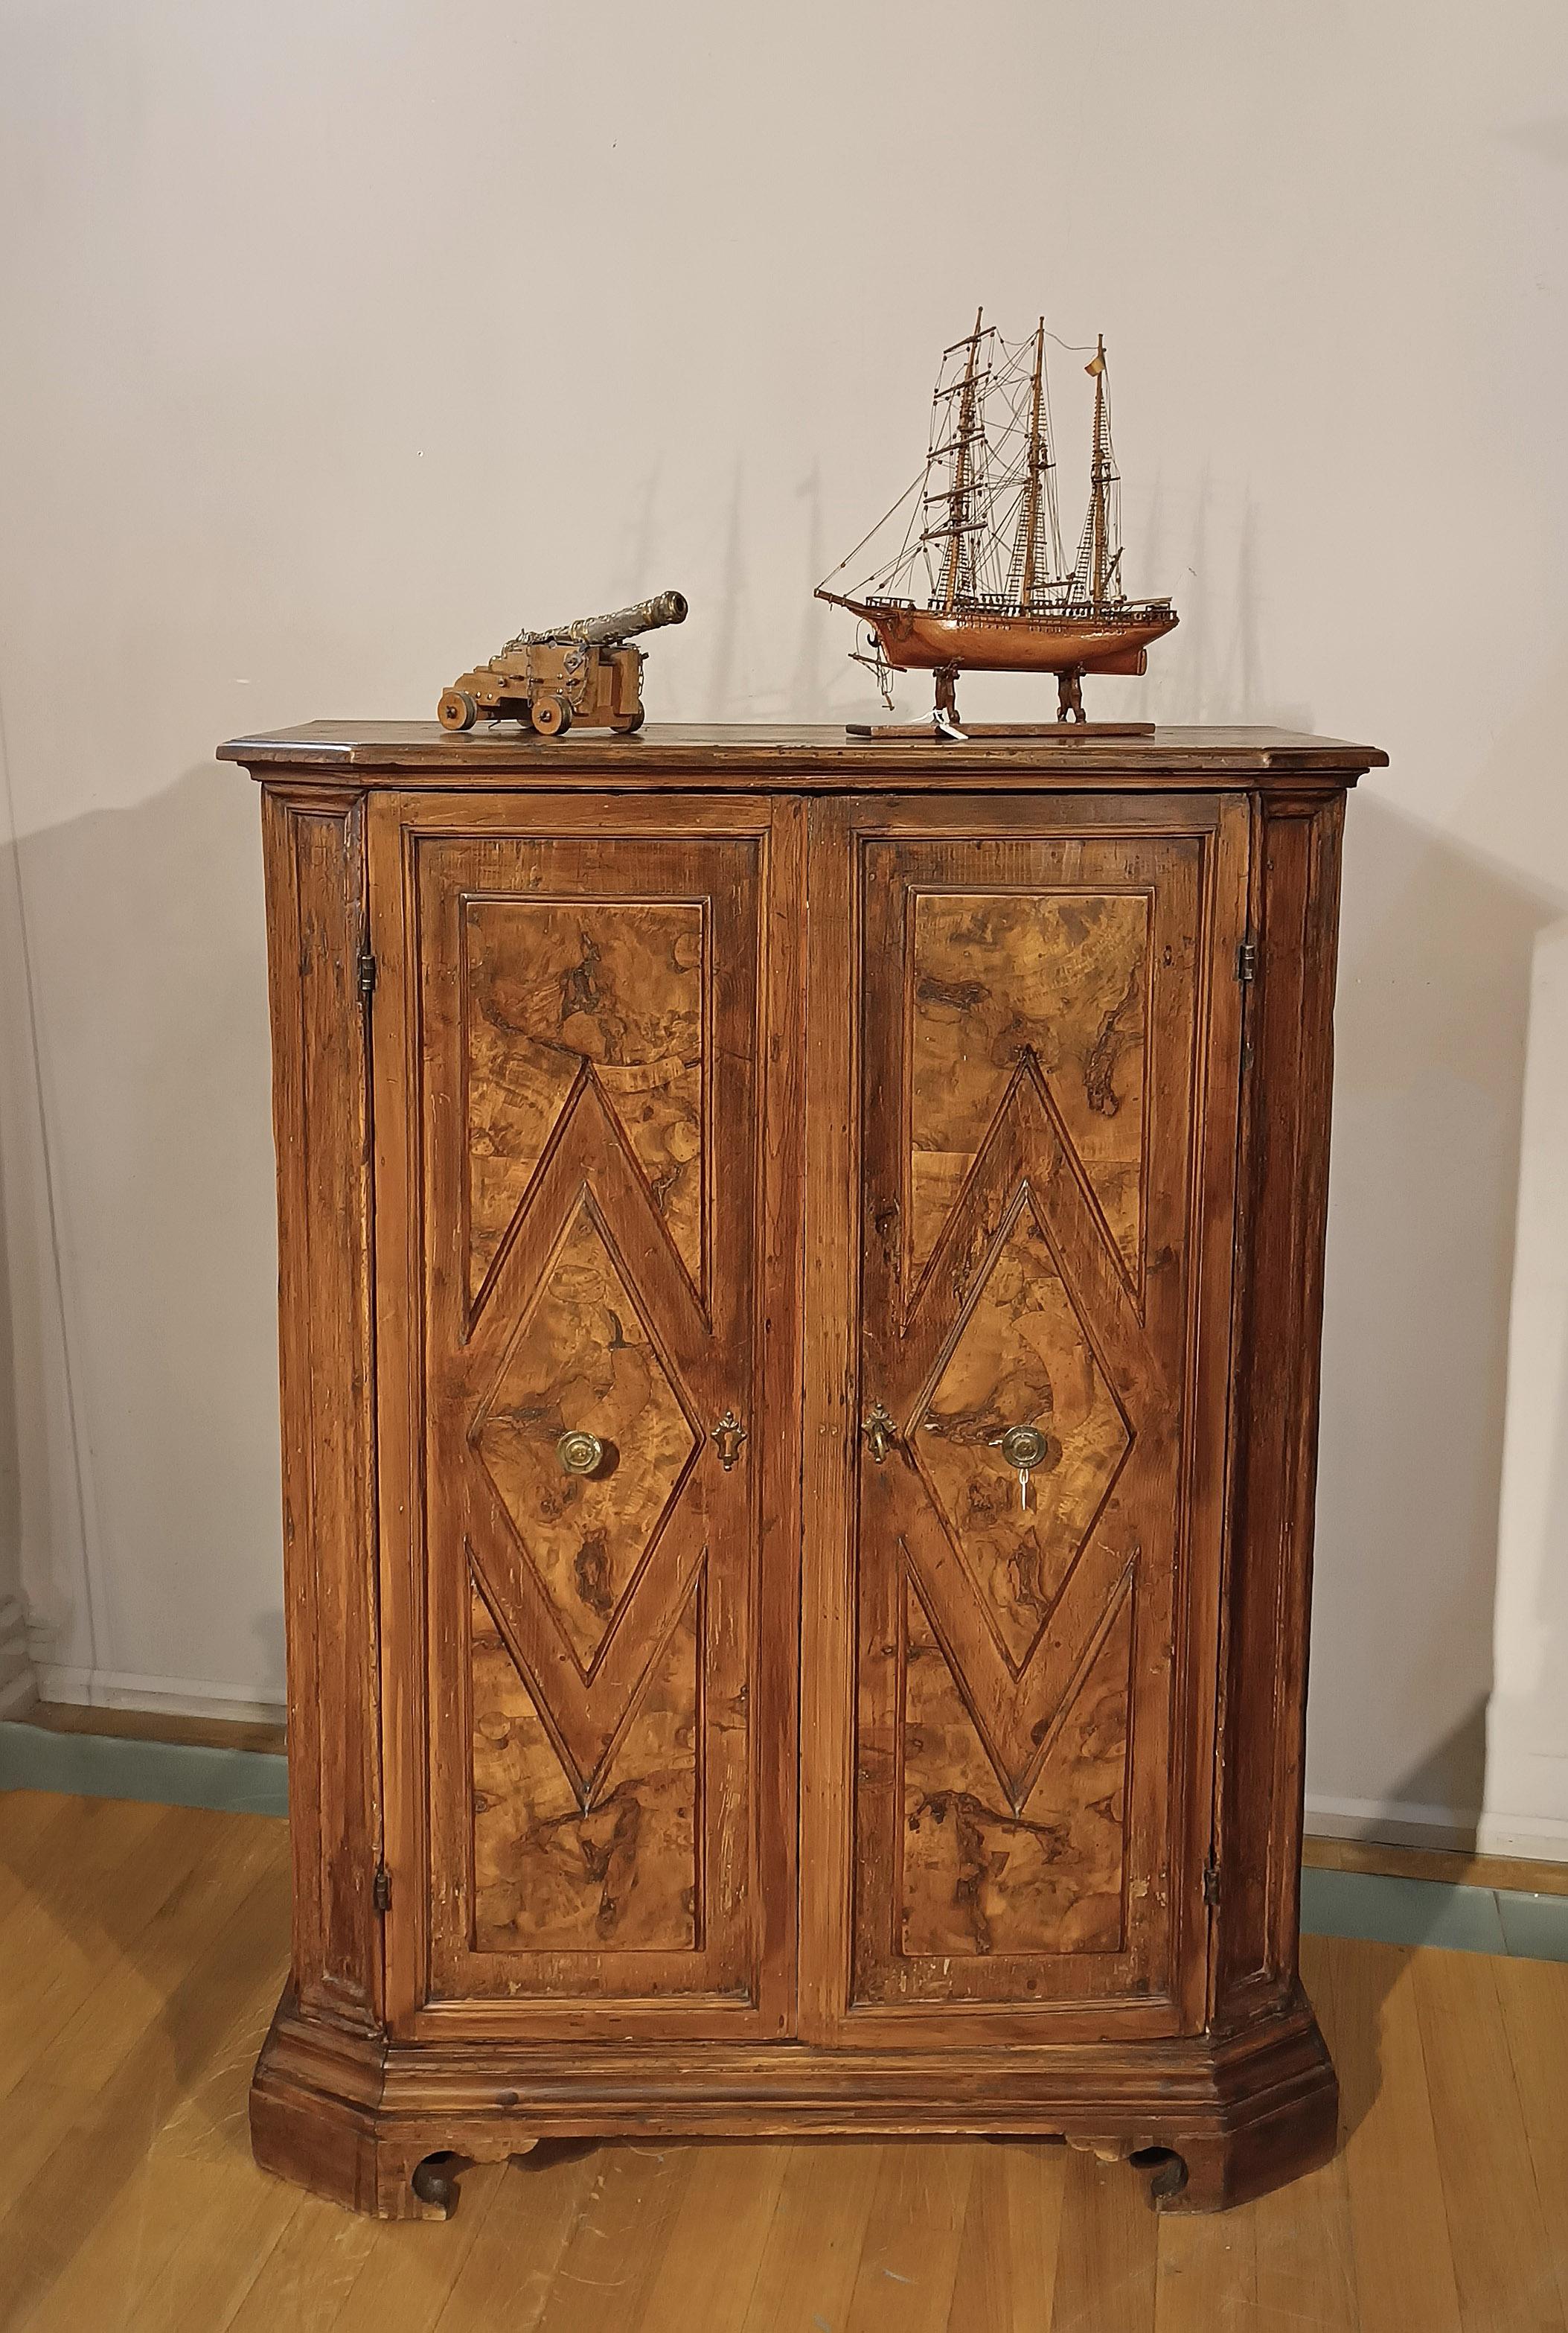 SECOND HALF OF THE 18th CENTURY WALNUT BRIAR CABINET  For Sale 3